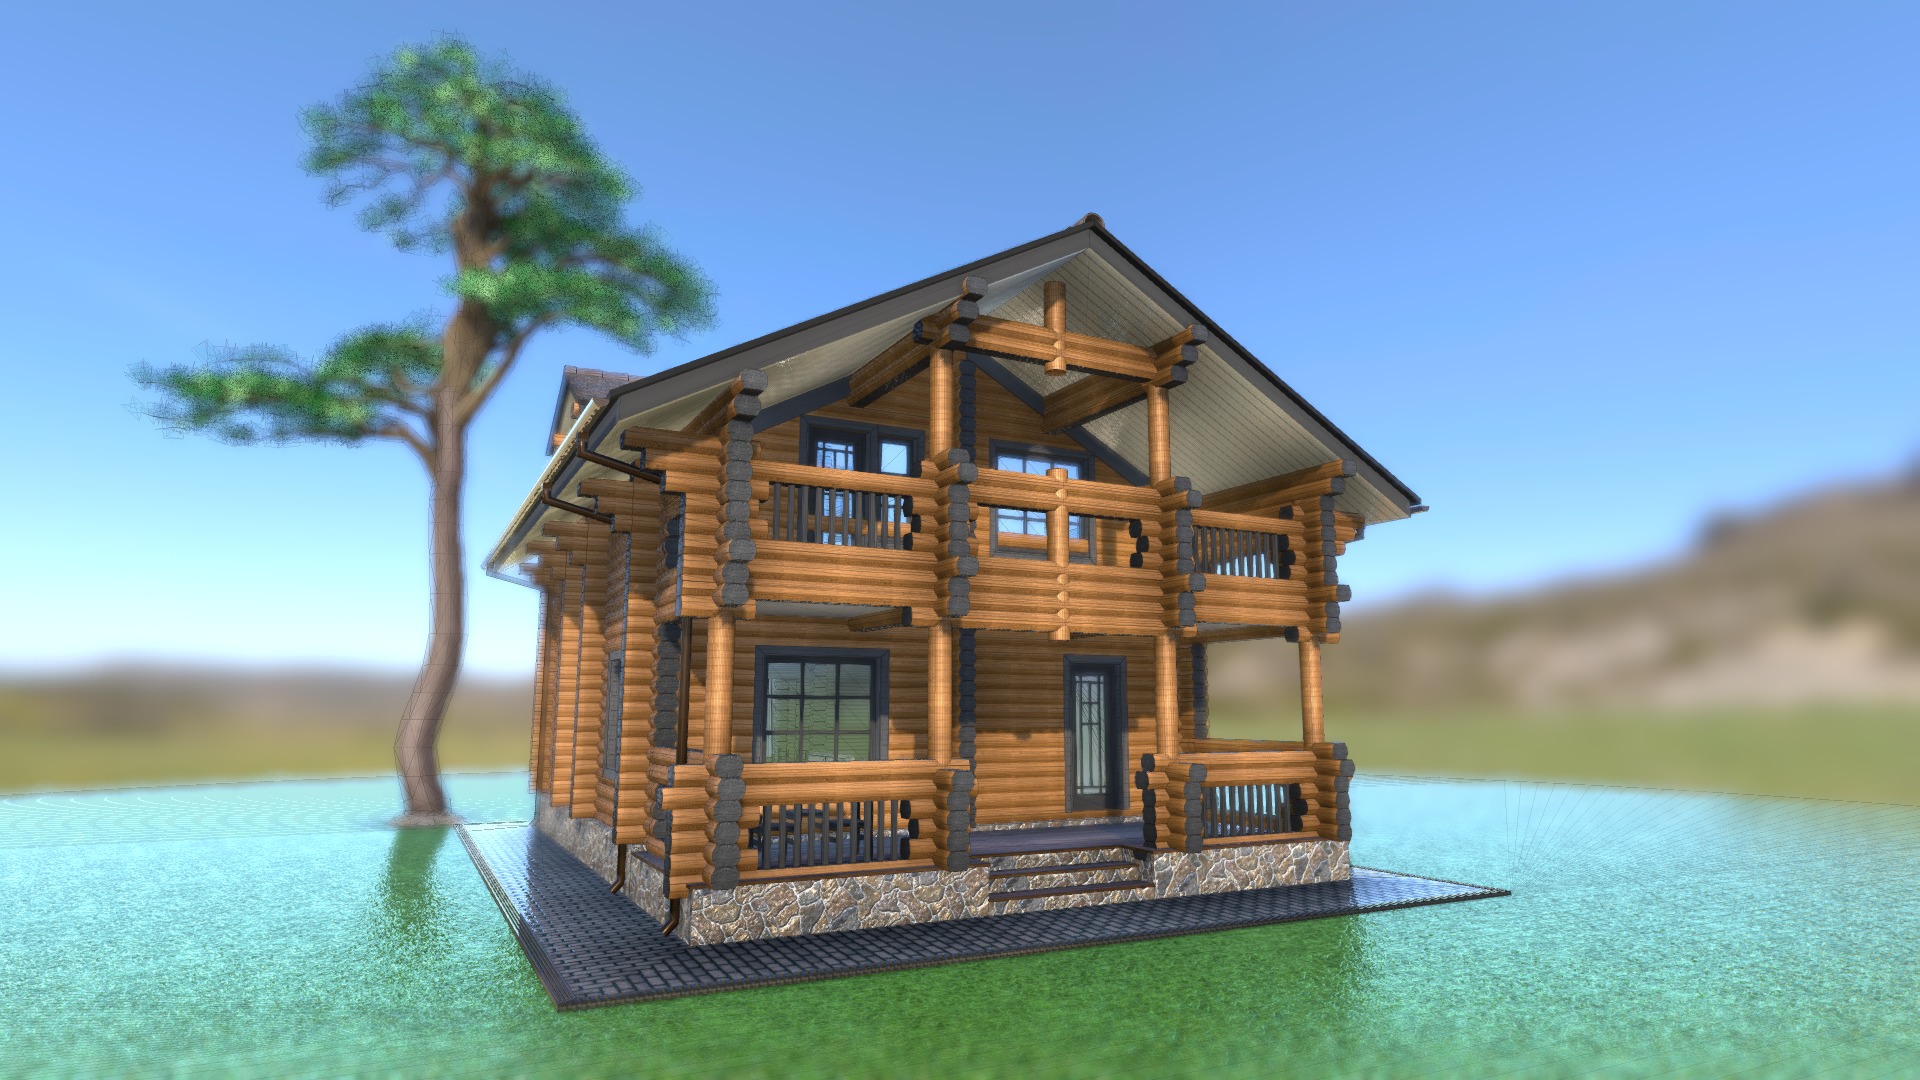 3D model PW-01_05-18 - This is a 3D model of the PW-01_05-18. The 3D model is about a house on a small island.